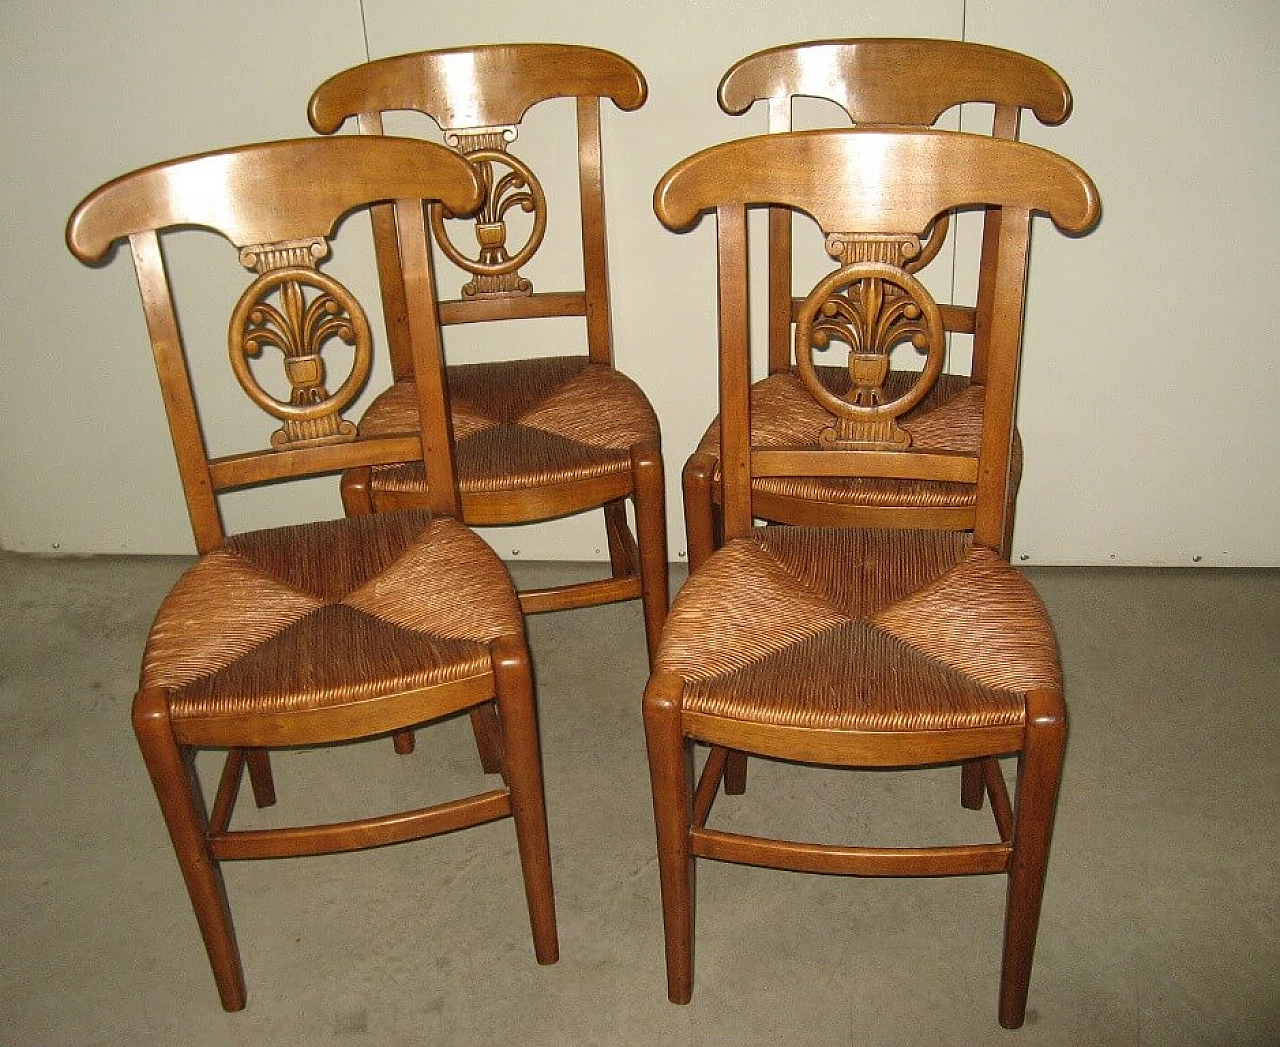 4 Walnut chairs with straw seat, early 2000s 1253811